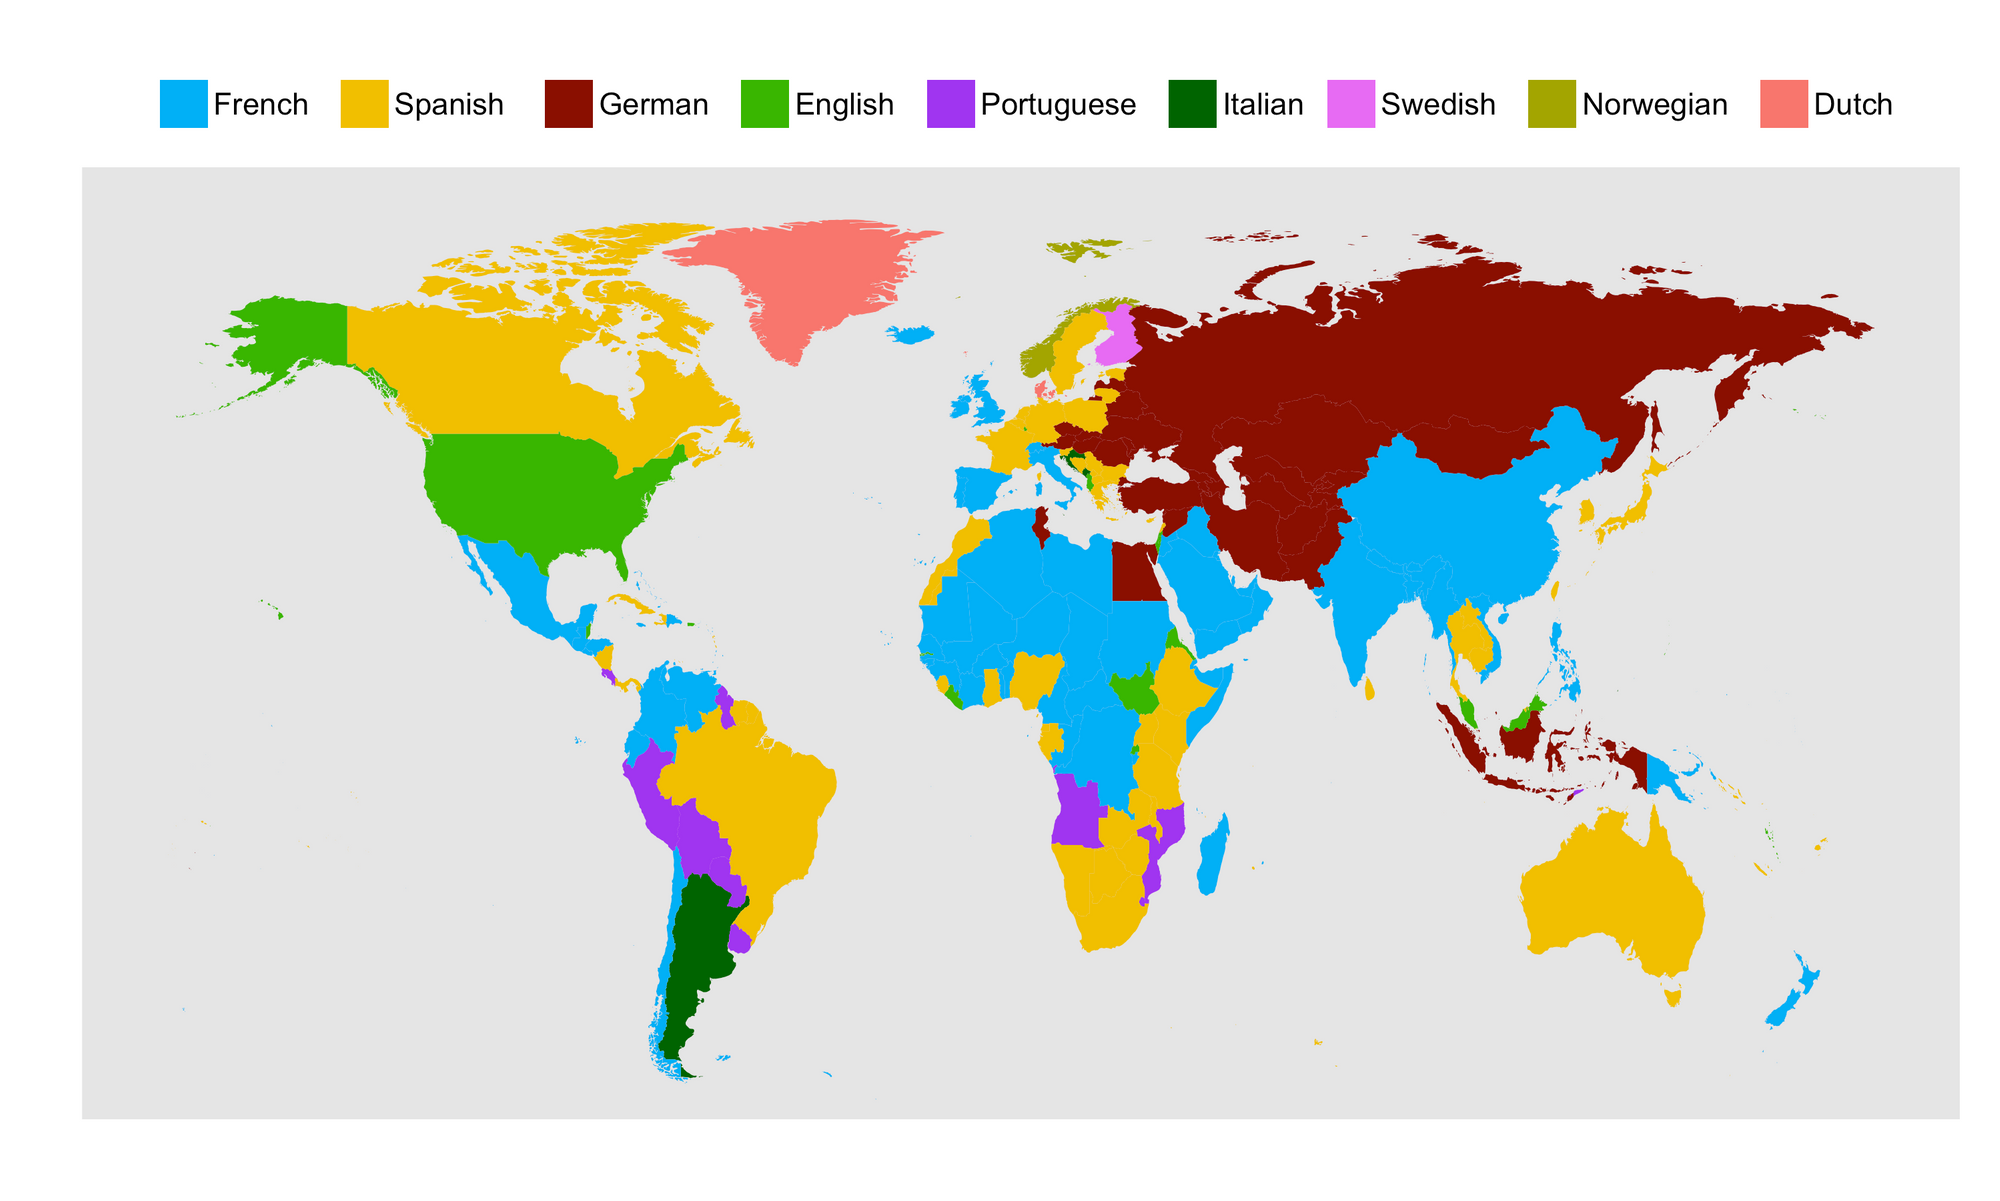 Find Out The Most Popular Language To Study In Each Country